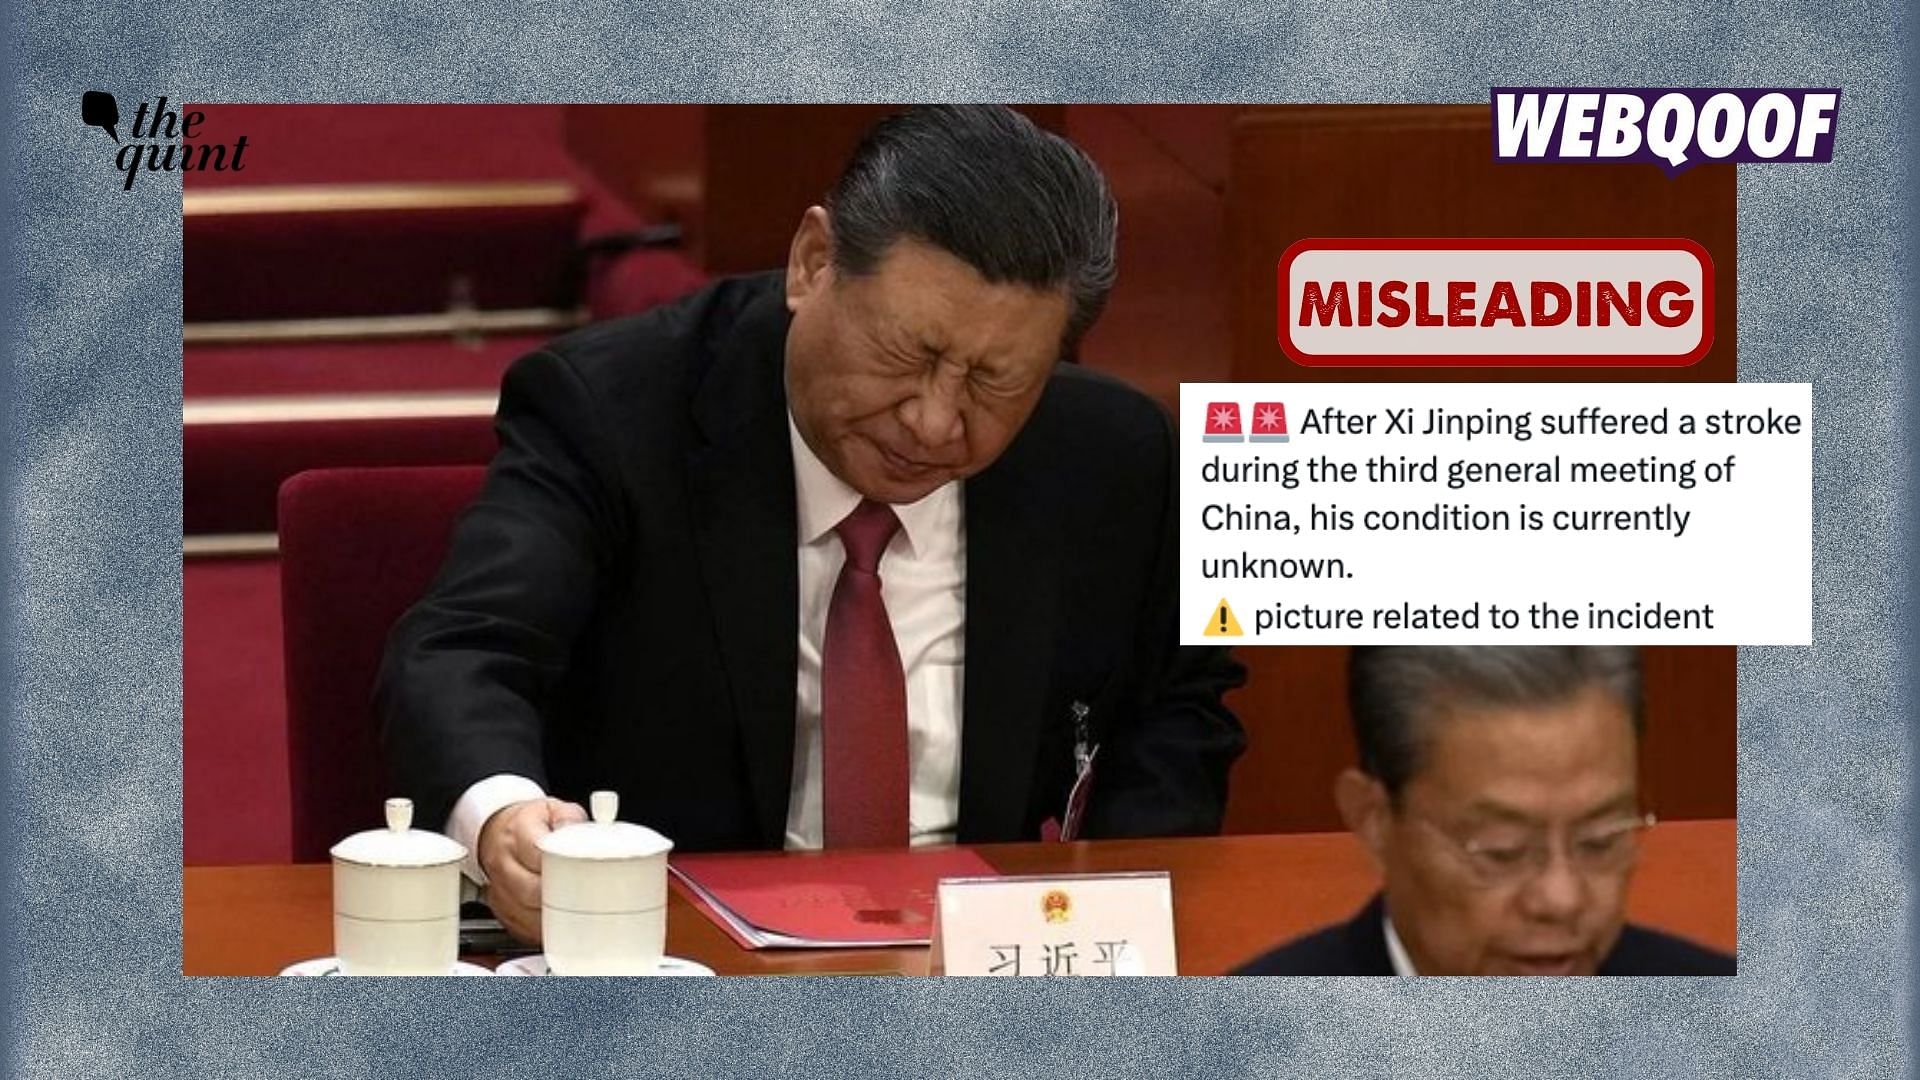 No, This Viral Photo Does Not Show Chinese President Xi Jinping Having a Stroke [Video]